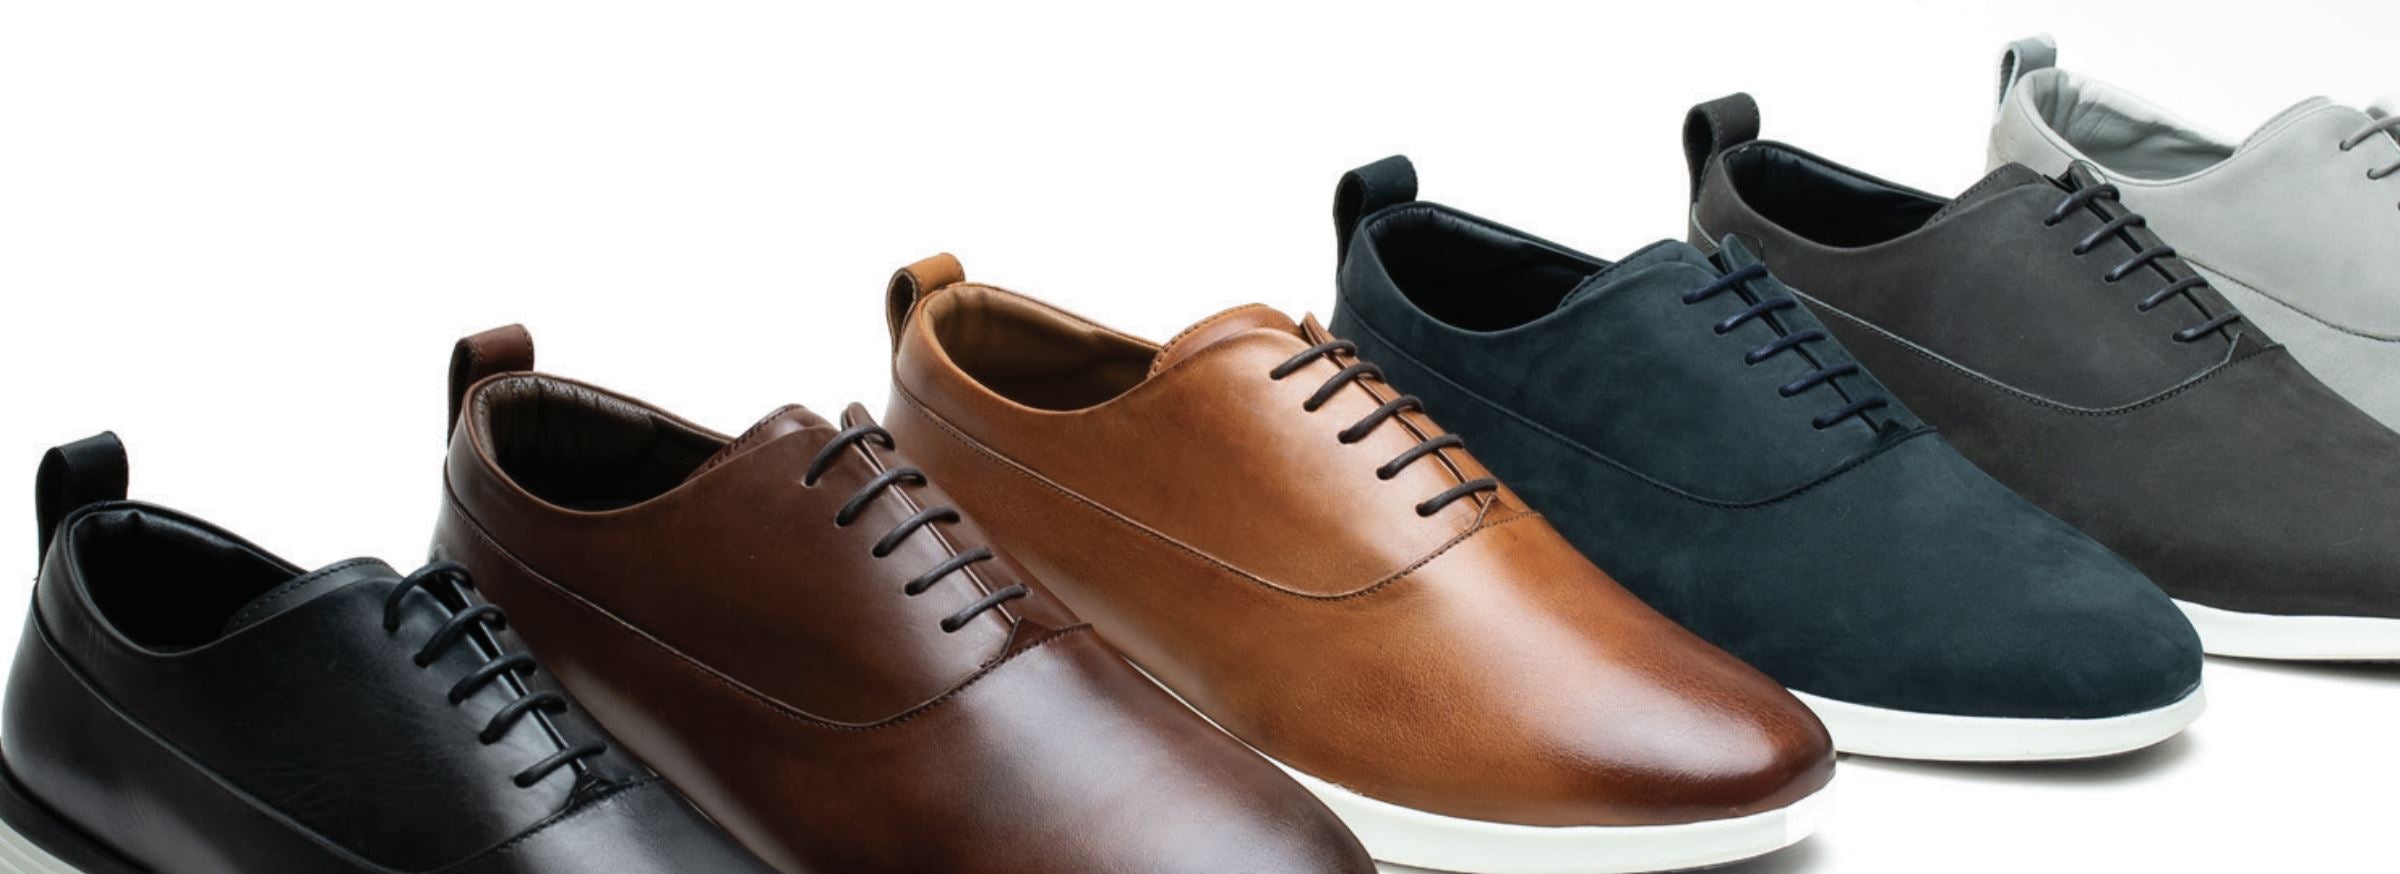 What are Hybrid Dress Shoes? | The Den 